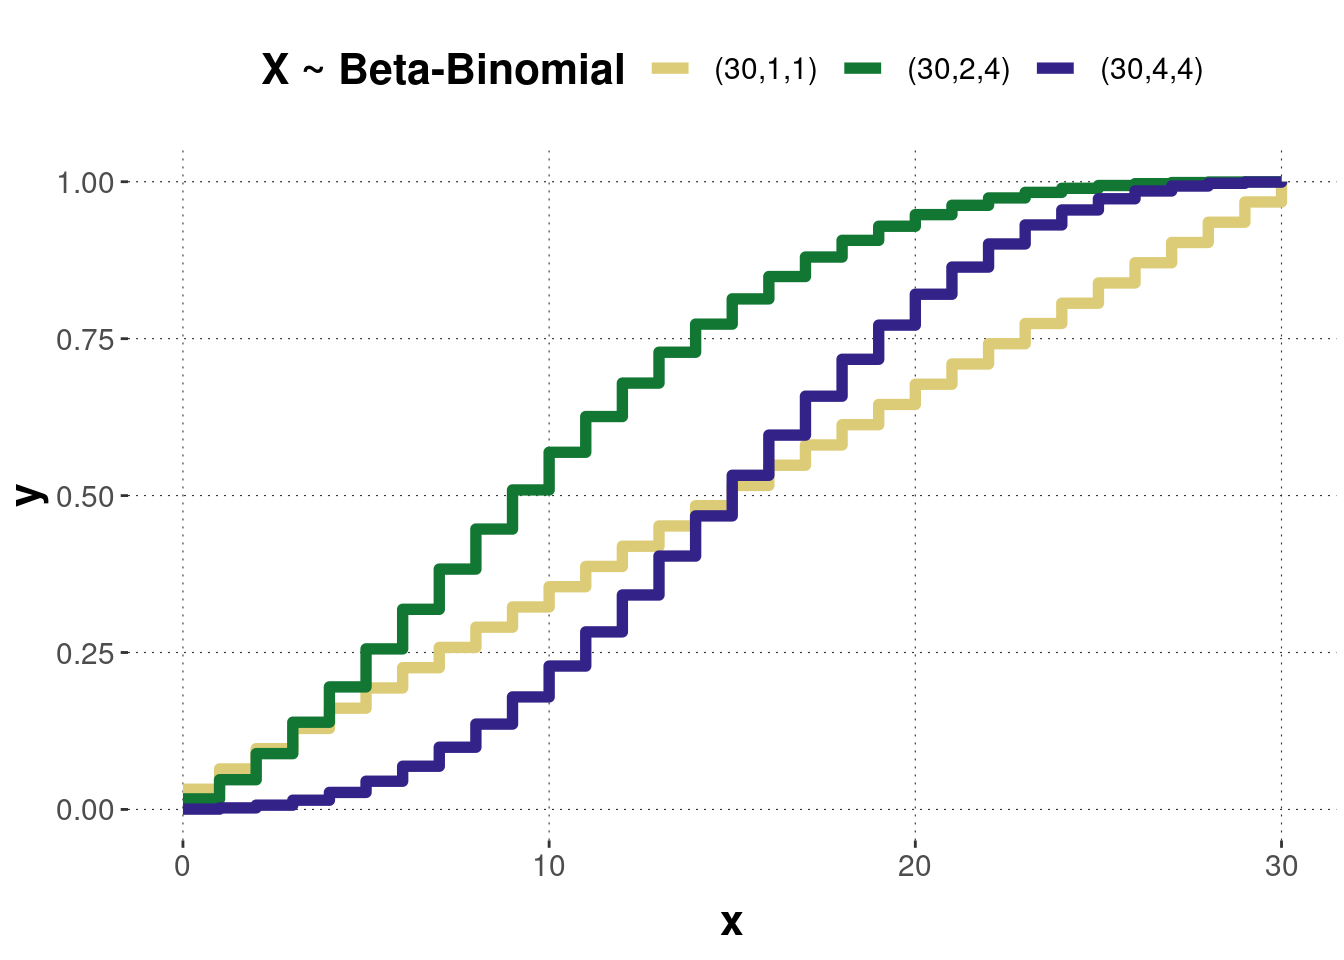 The cumulative distribution functions of the beta-binomial distributions corresponding to the previous probability mass functions.